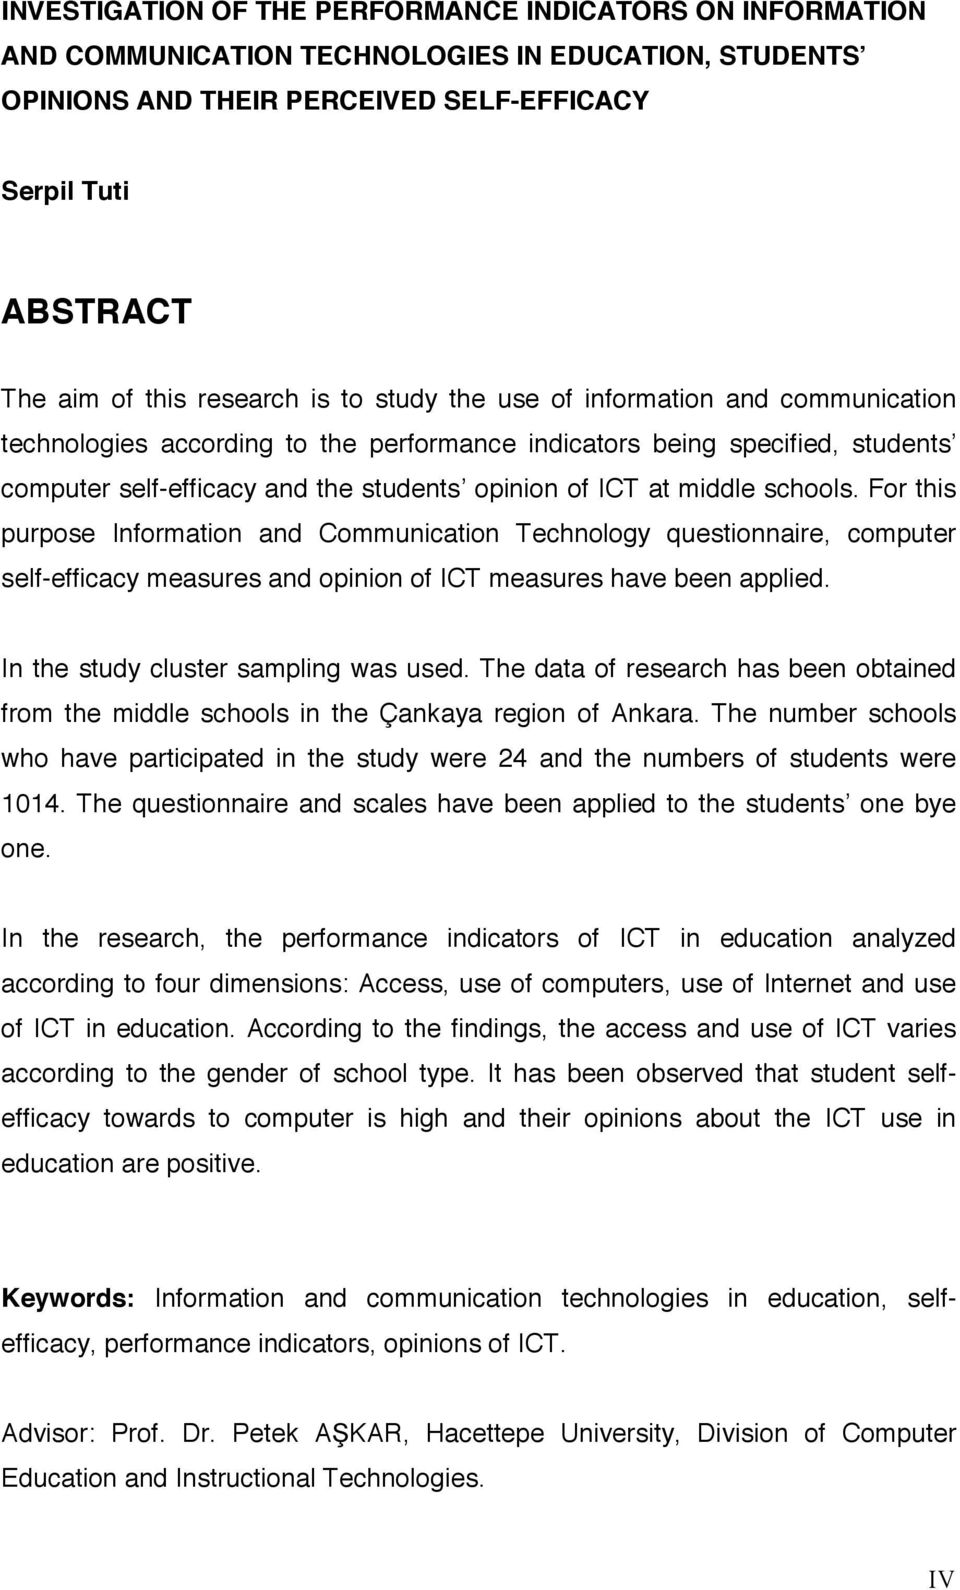 middle schools. For this purpose Information and Communication Technology questionnaire, computer self-efficacy measures and opinion of ICT measures have been applied.